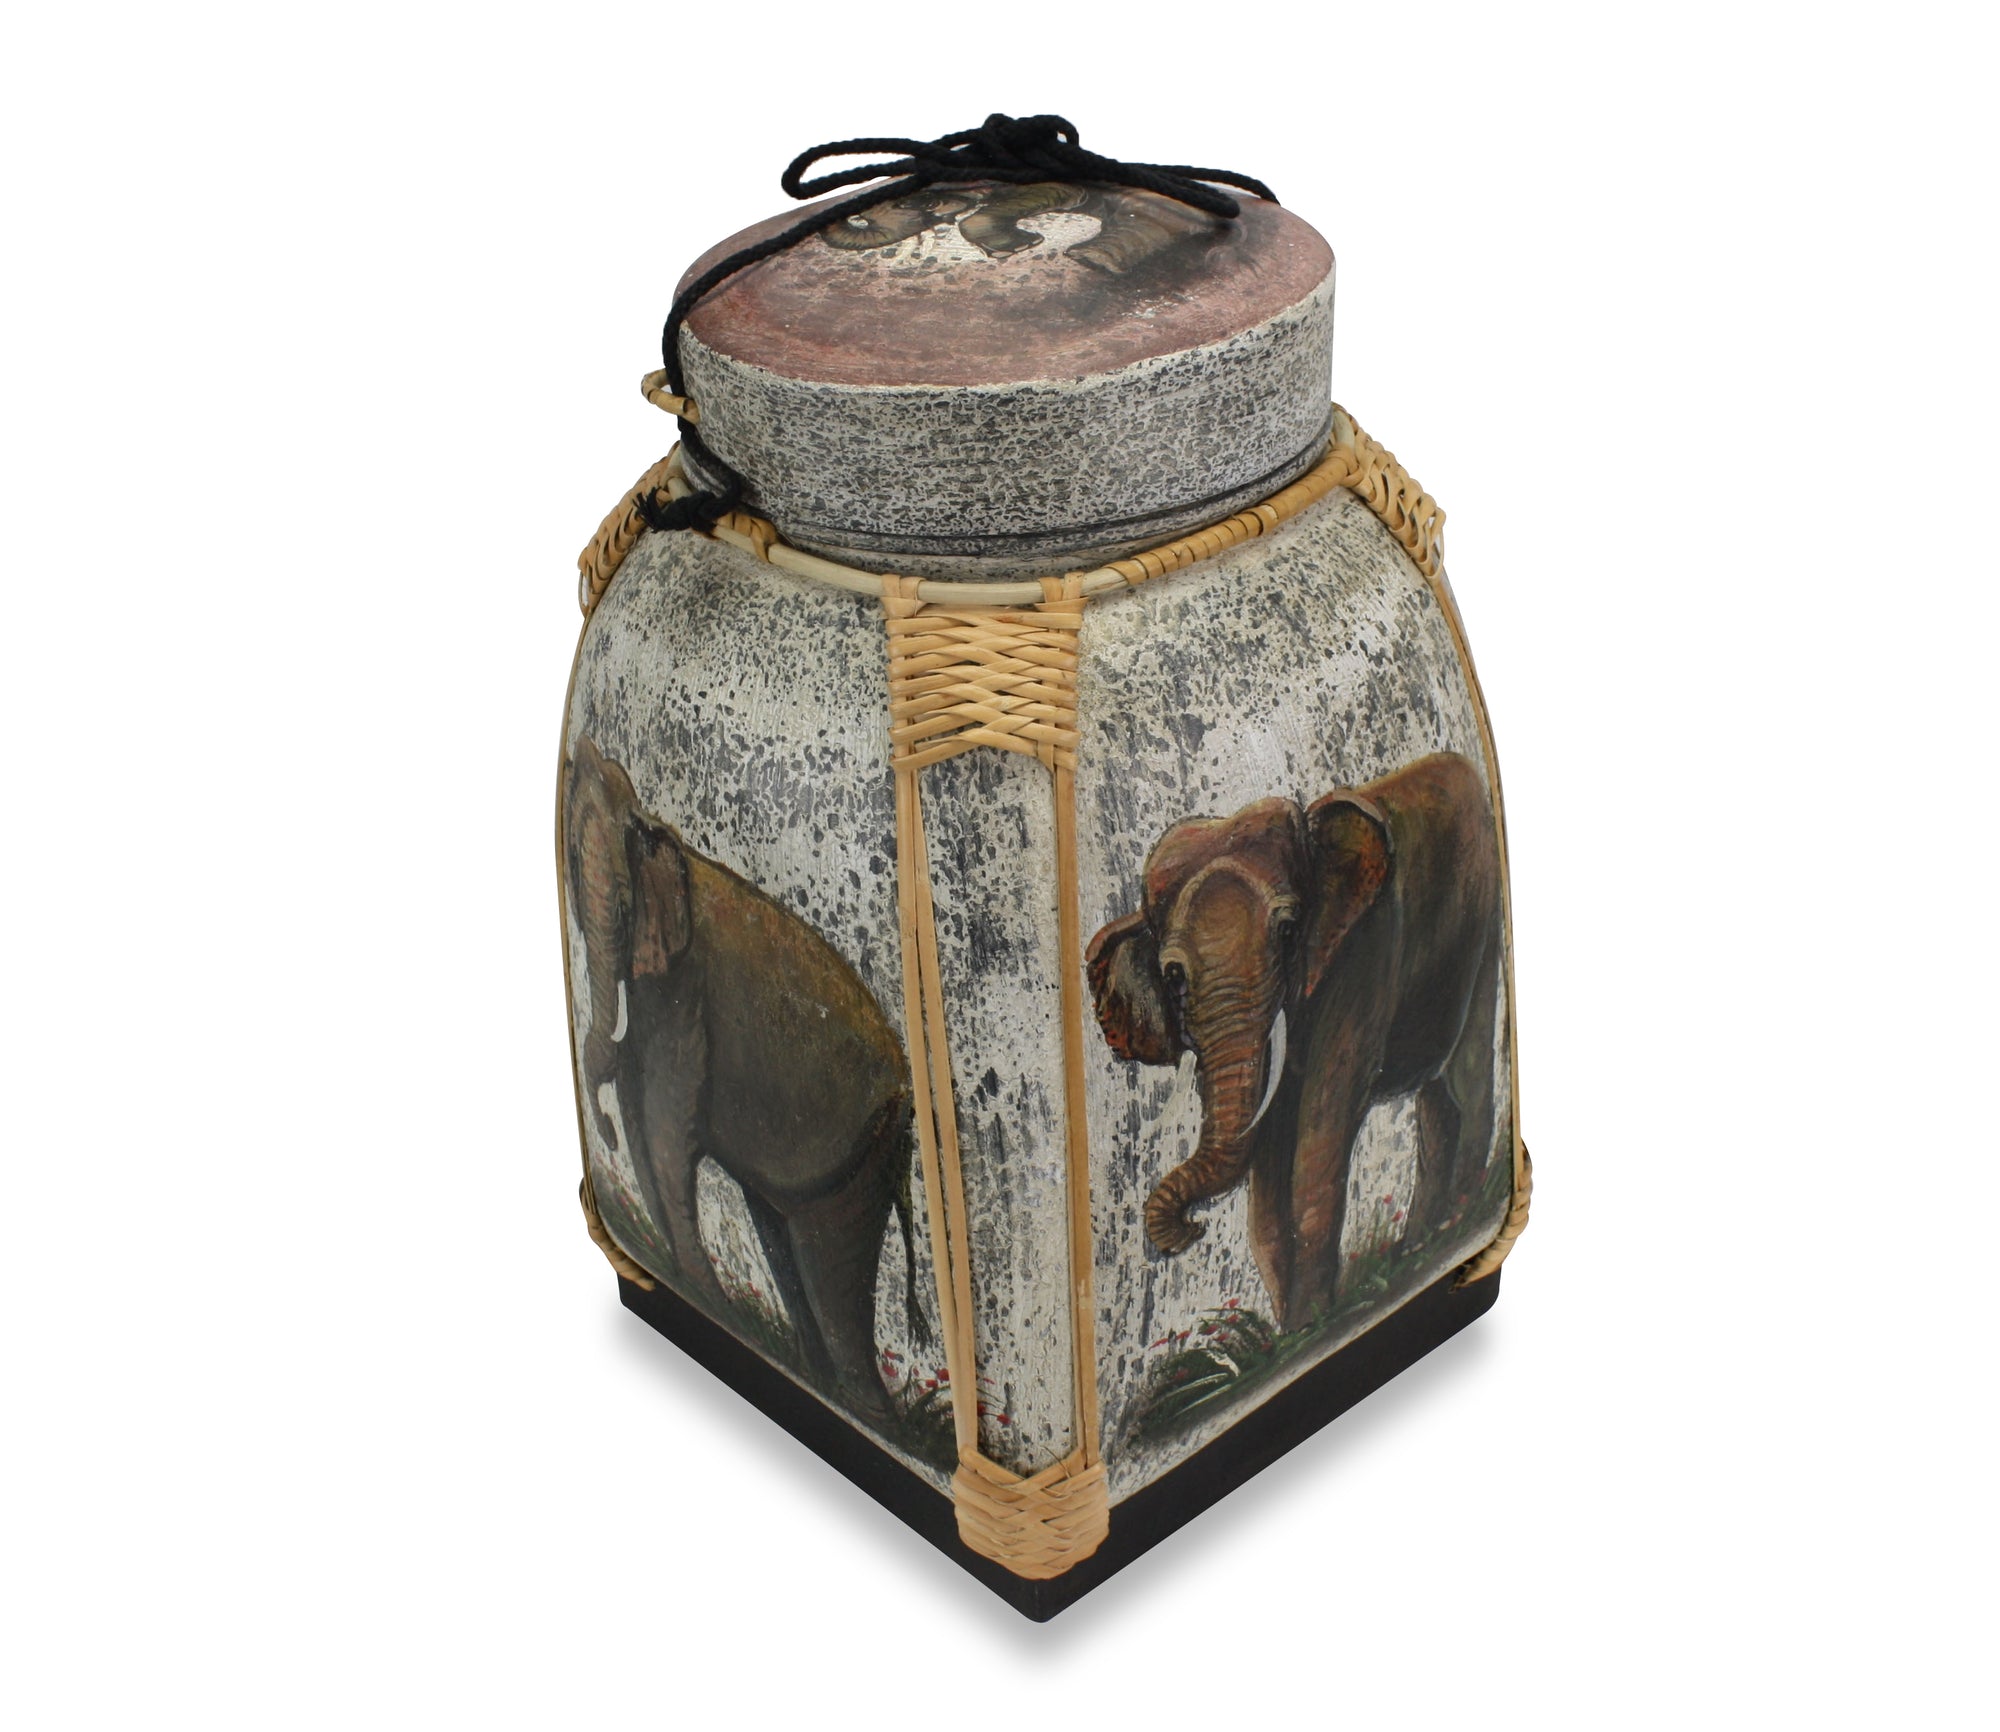 Rice seed box - Extra Large Lacquered Bamboo Basket, 45cm high, Elephants, Standing - farangshop-co